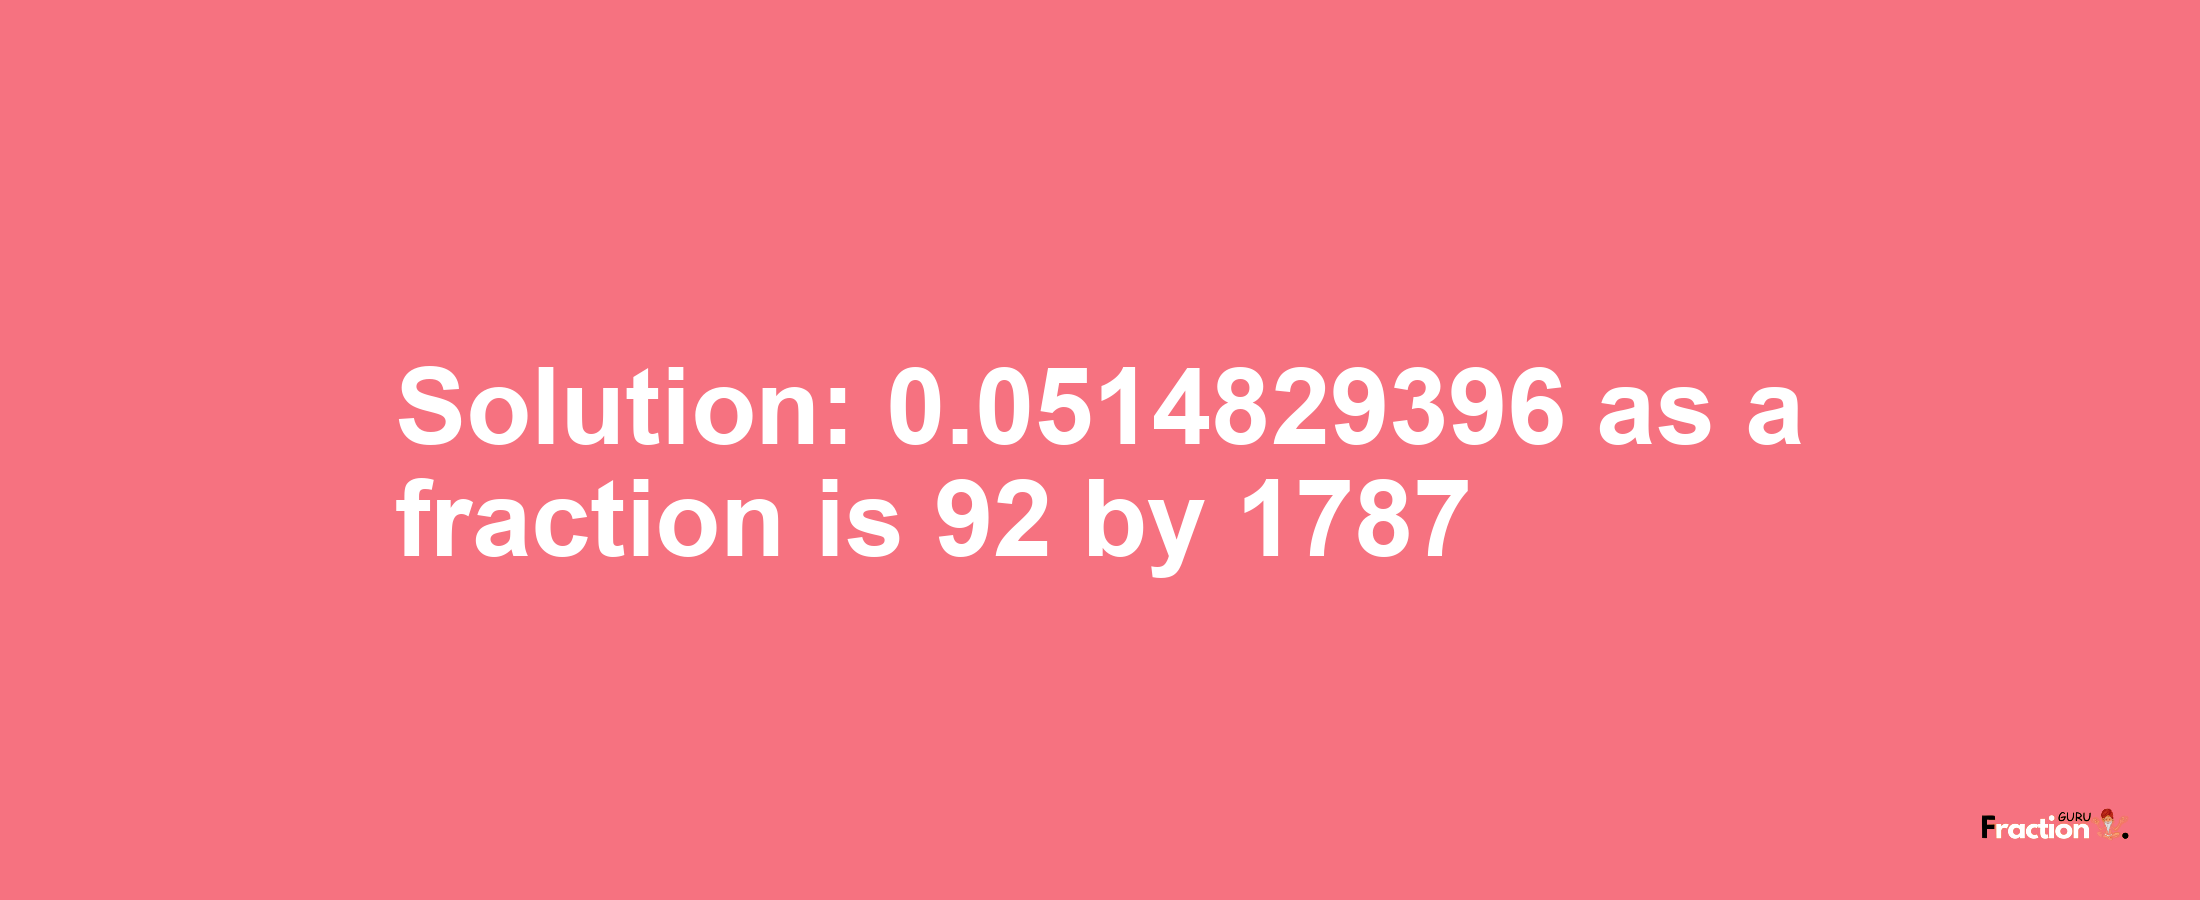 Solution:0.0514829396 as a fraction is 92/1787